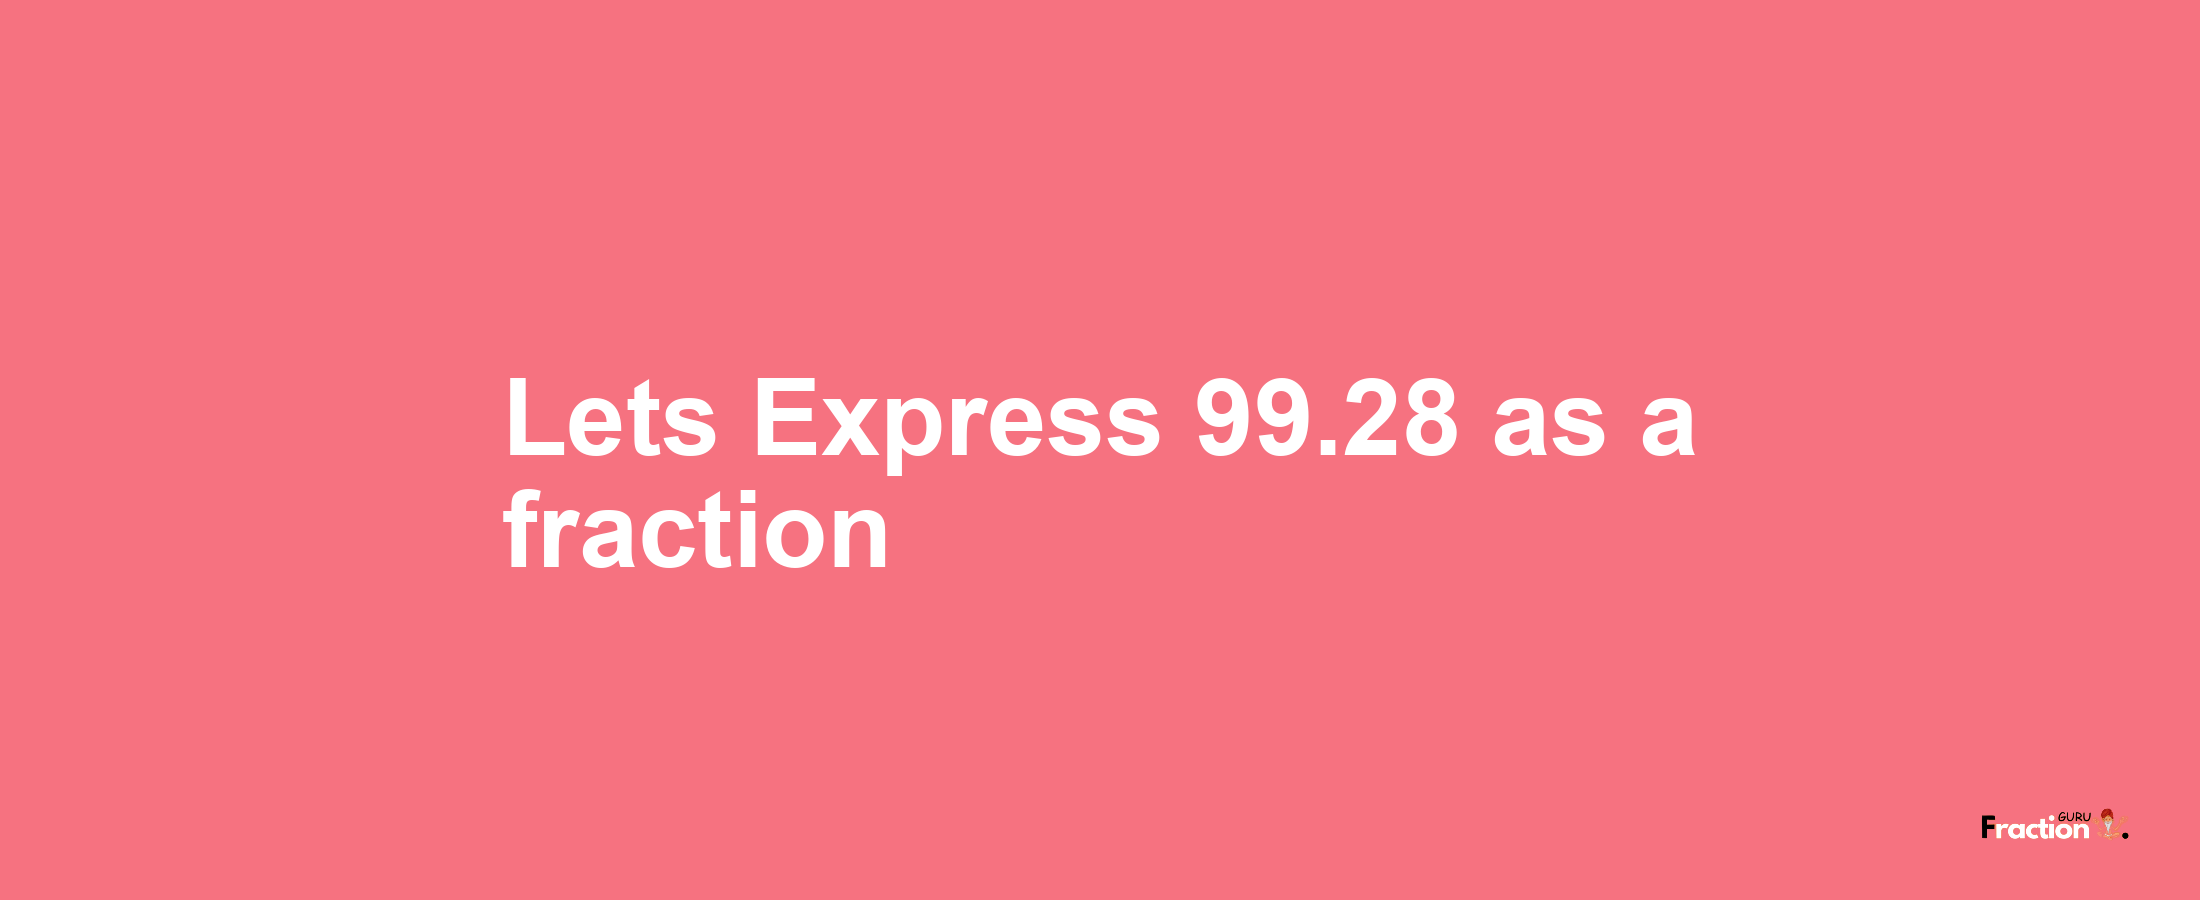 Lets Express 99.28 as afraction